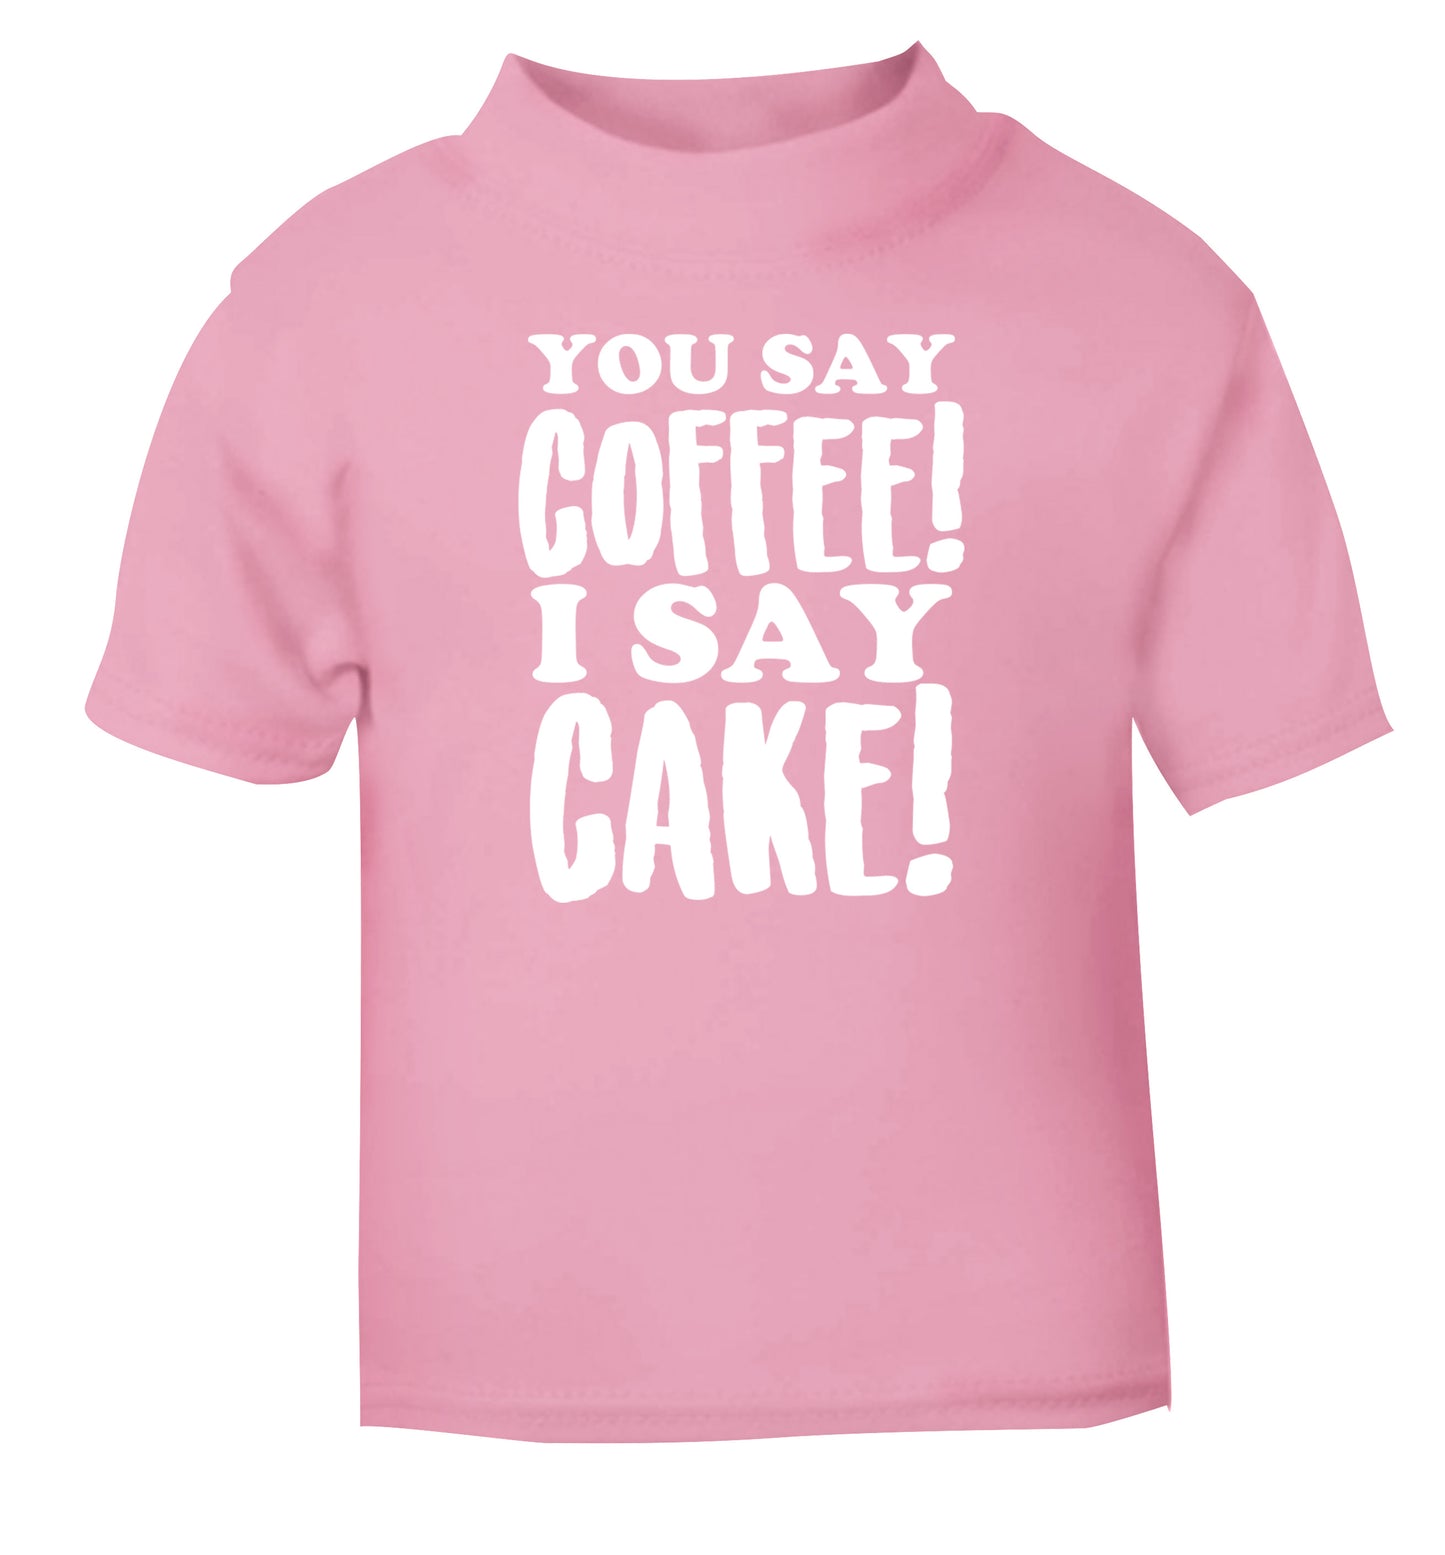 You say coffee I say cake! light pink Baby Toddler Tshirt 2 Years